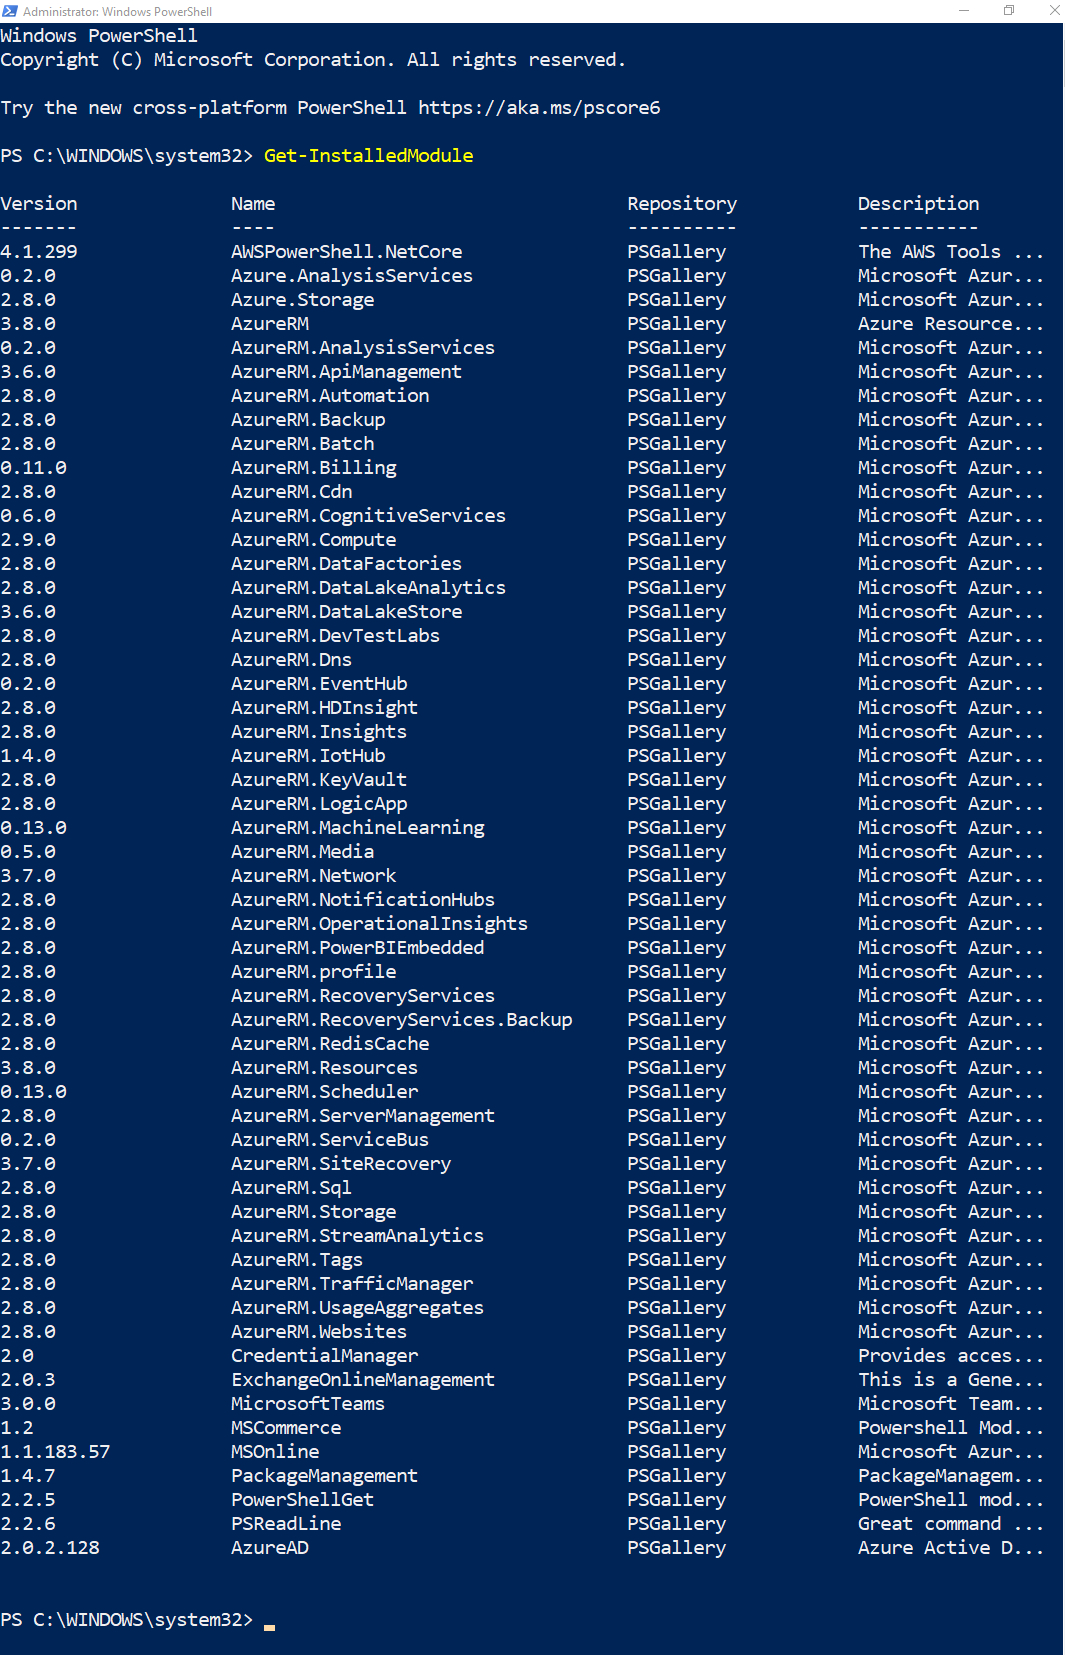 Get-InstalledModule cmdlet lists the installed PowerShell modules